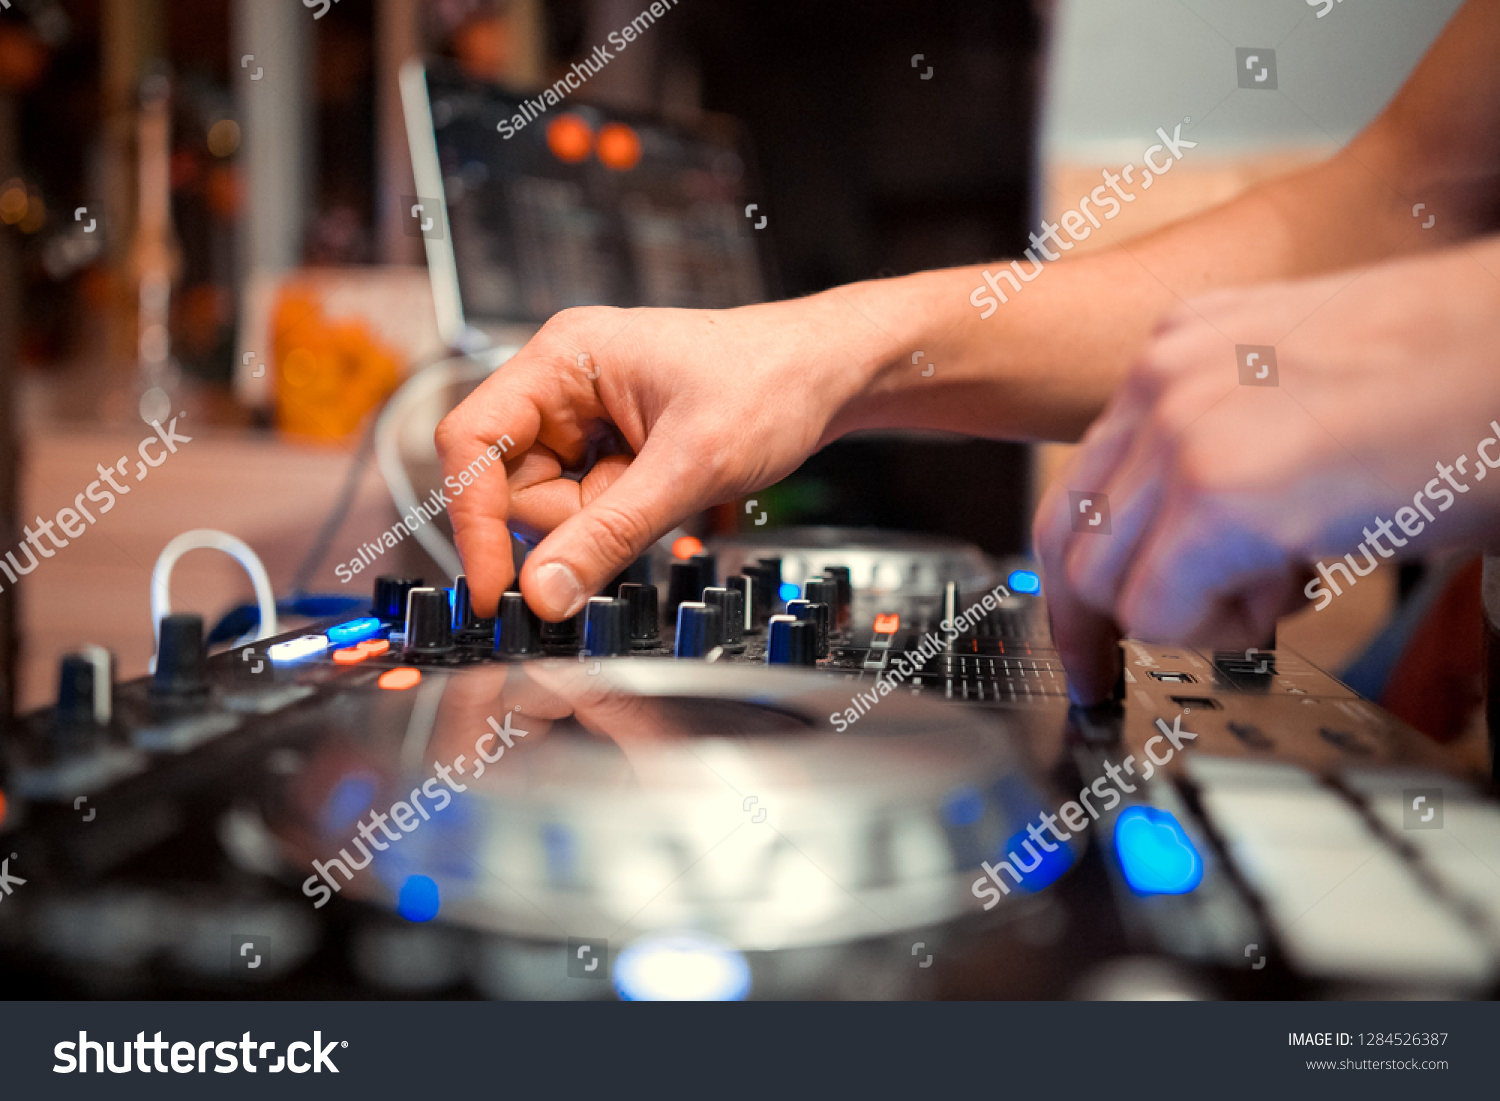 control DJ for mixing music with blurred people dancing at party in nightclub #1284526387